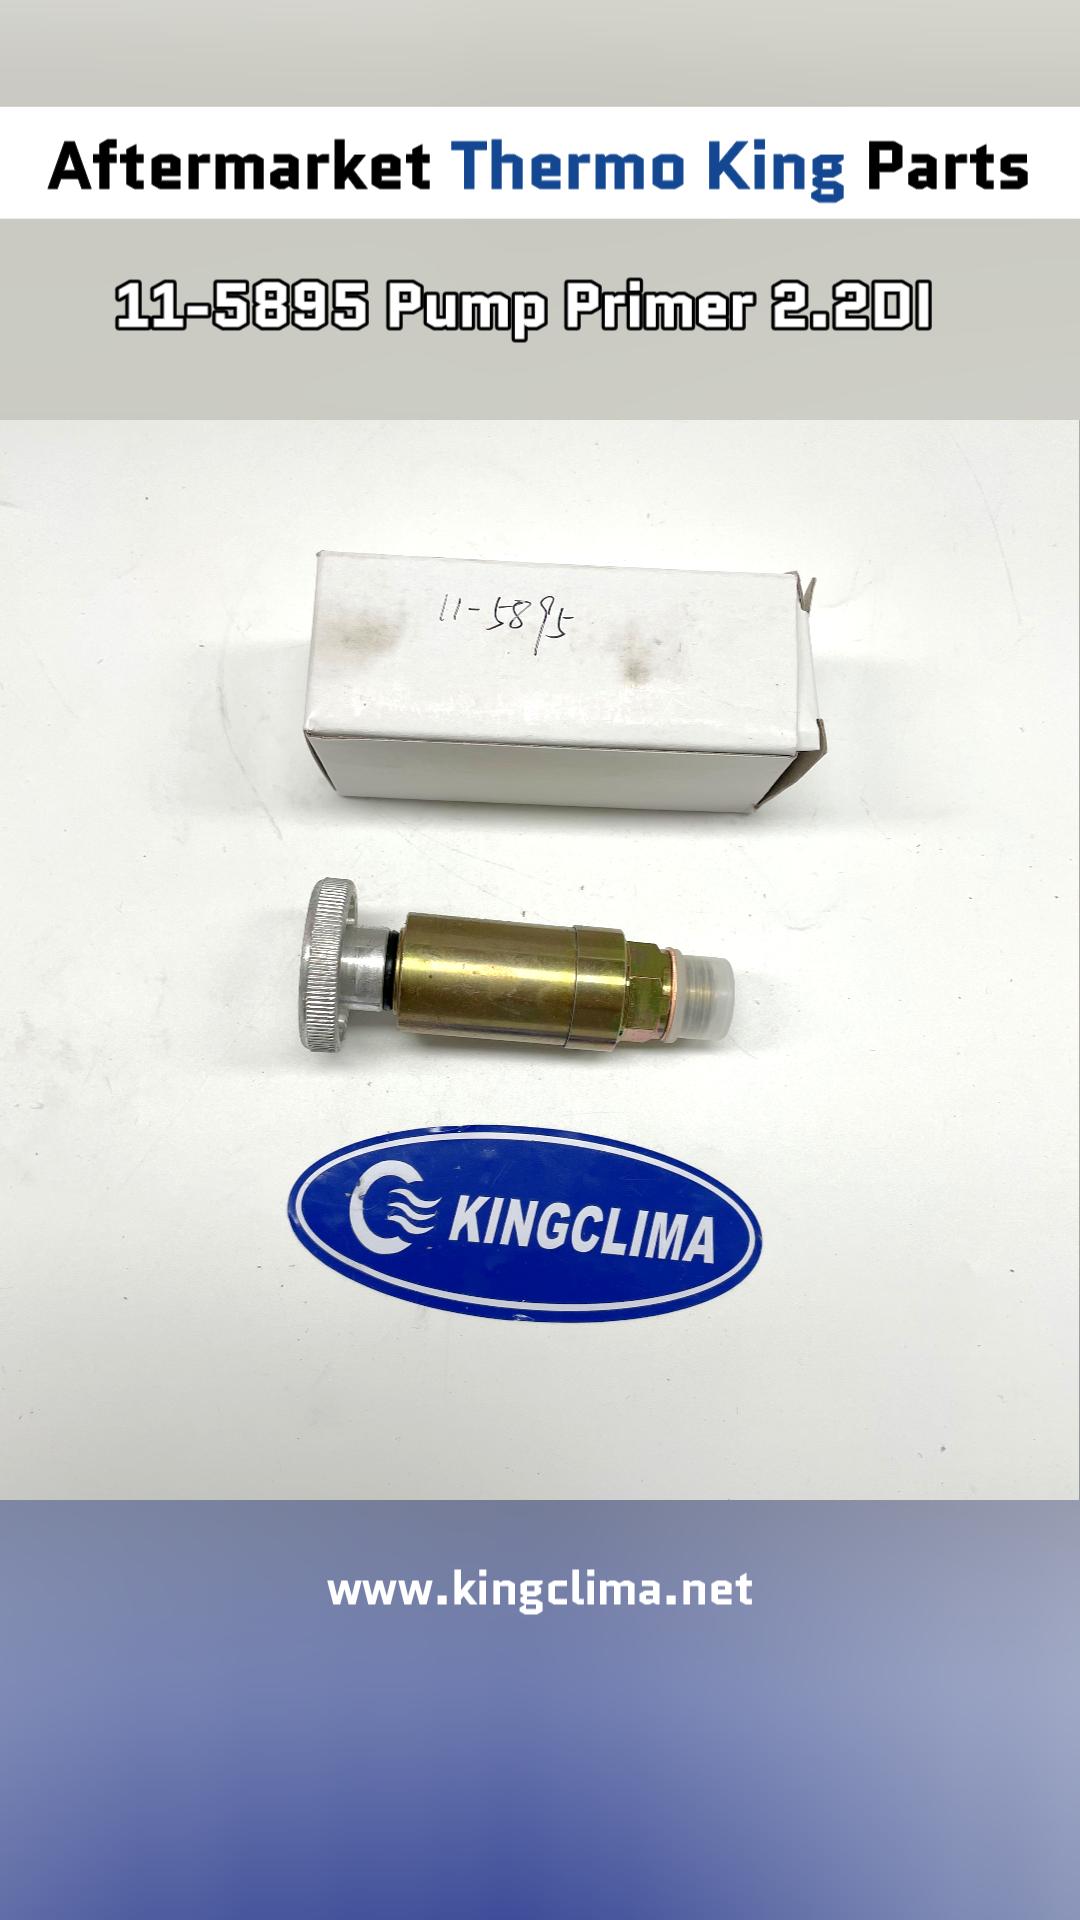 11-5895 Pump Primer 2.2DI For Thermo King Aftermarket Parts